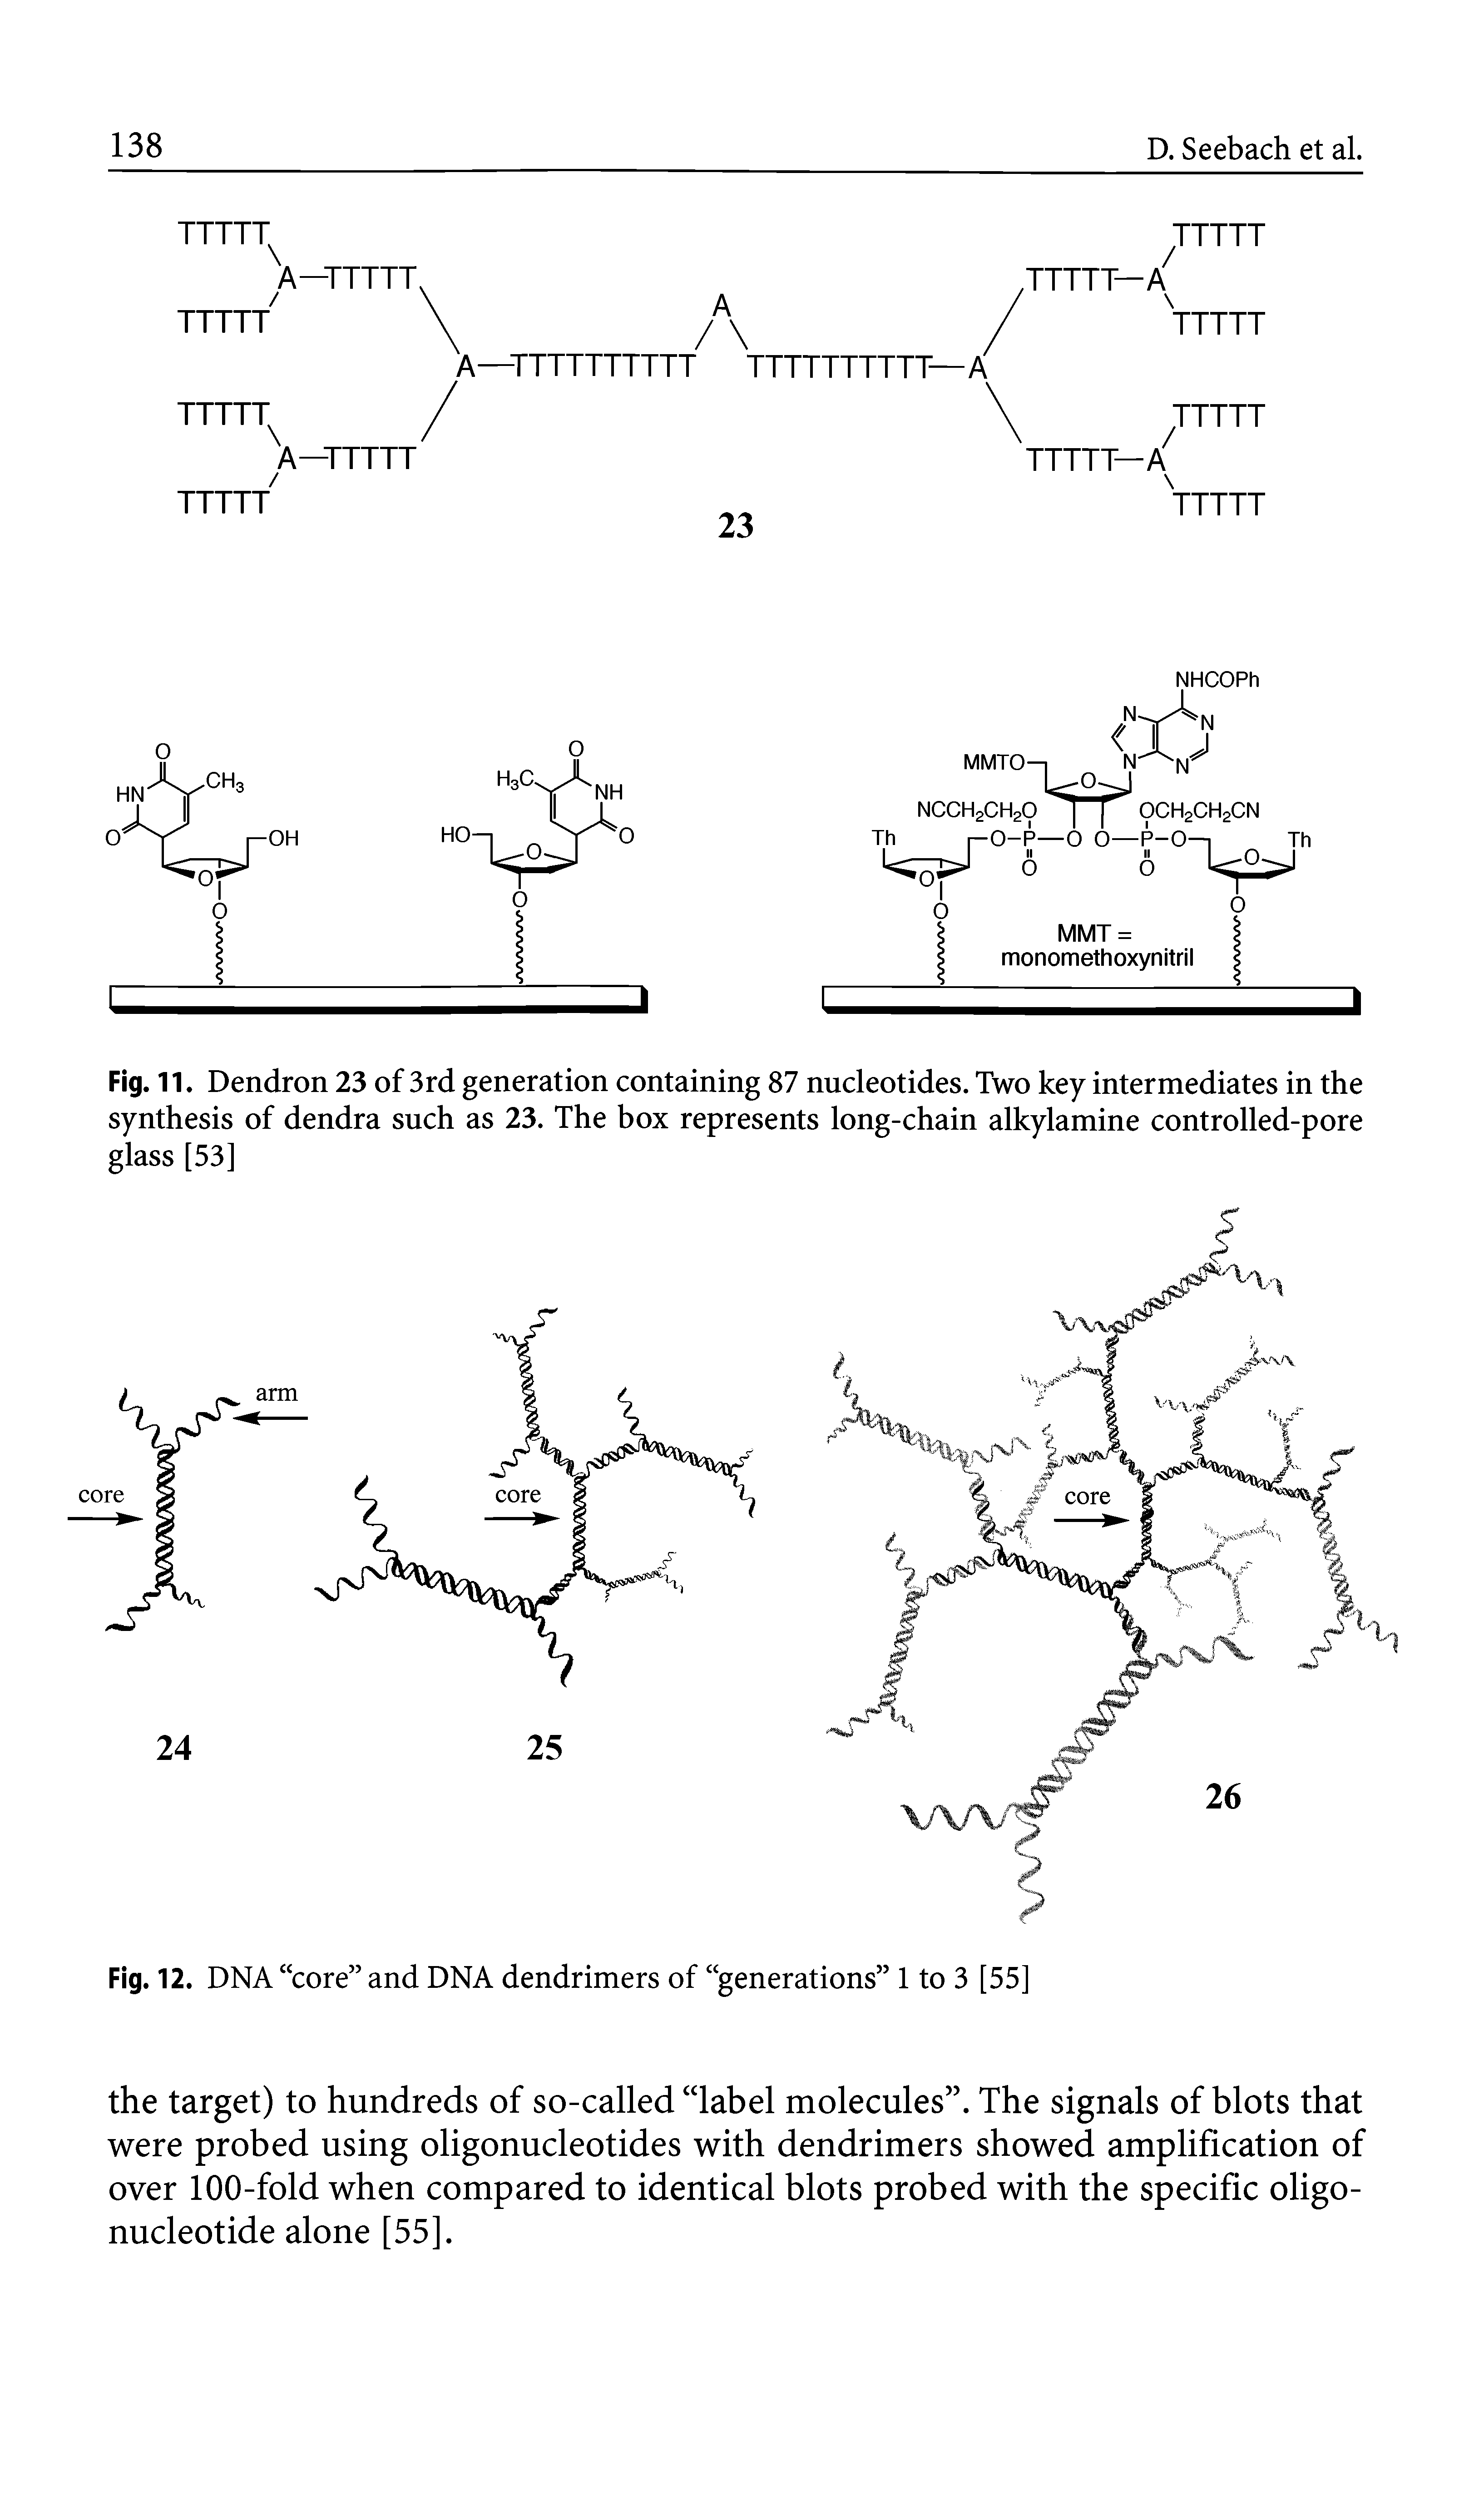 Fig. 11. Dendron 23 of 3rd generation containing 87 nucleotides. Two key intermediates in the synthesis of dendra such as 23. The box represents long-chain alkylamine controlled-pore glass [53]...